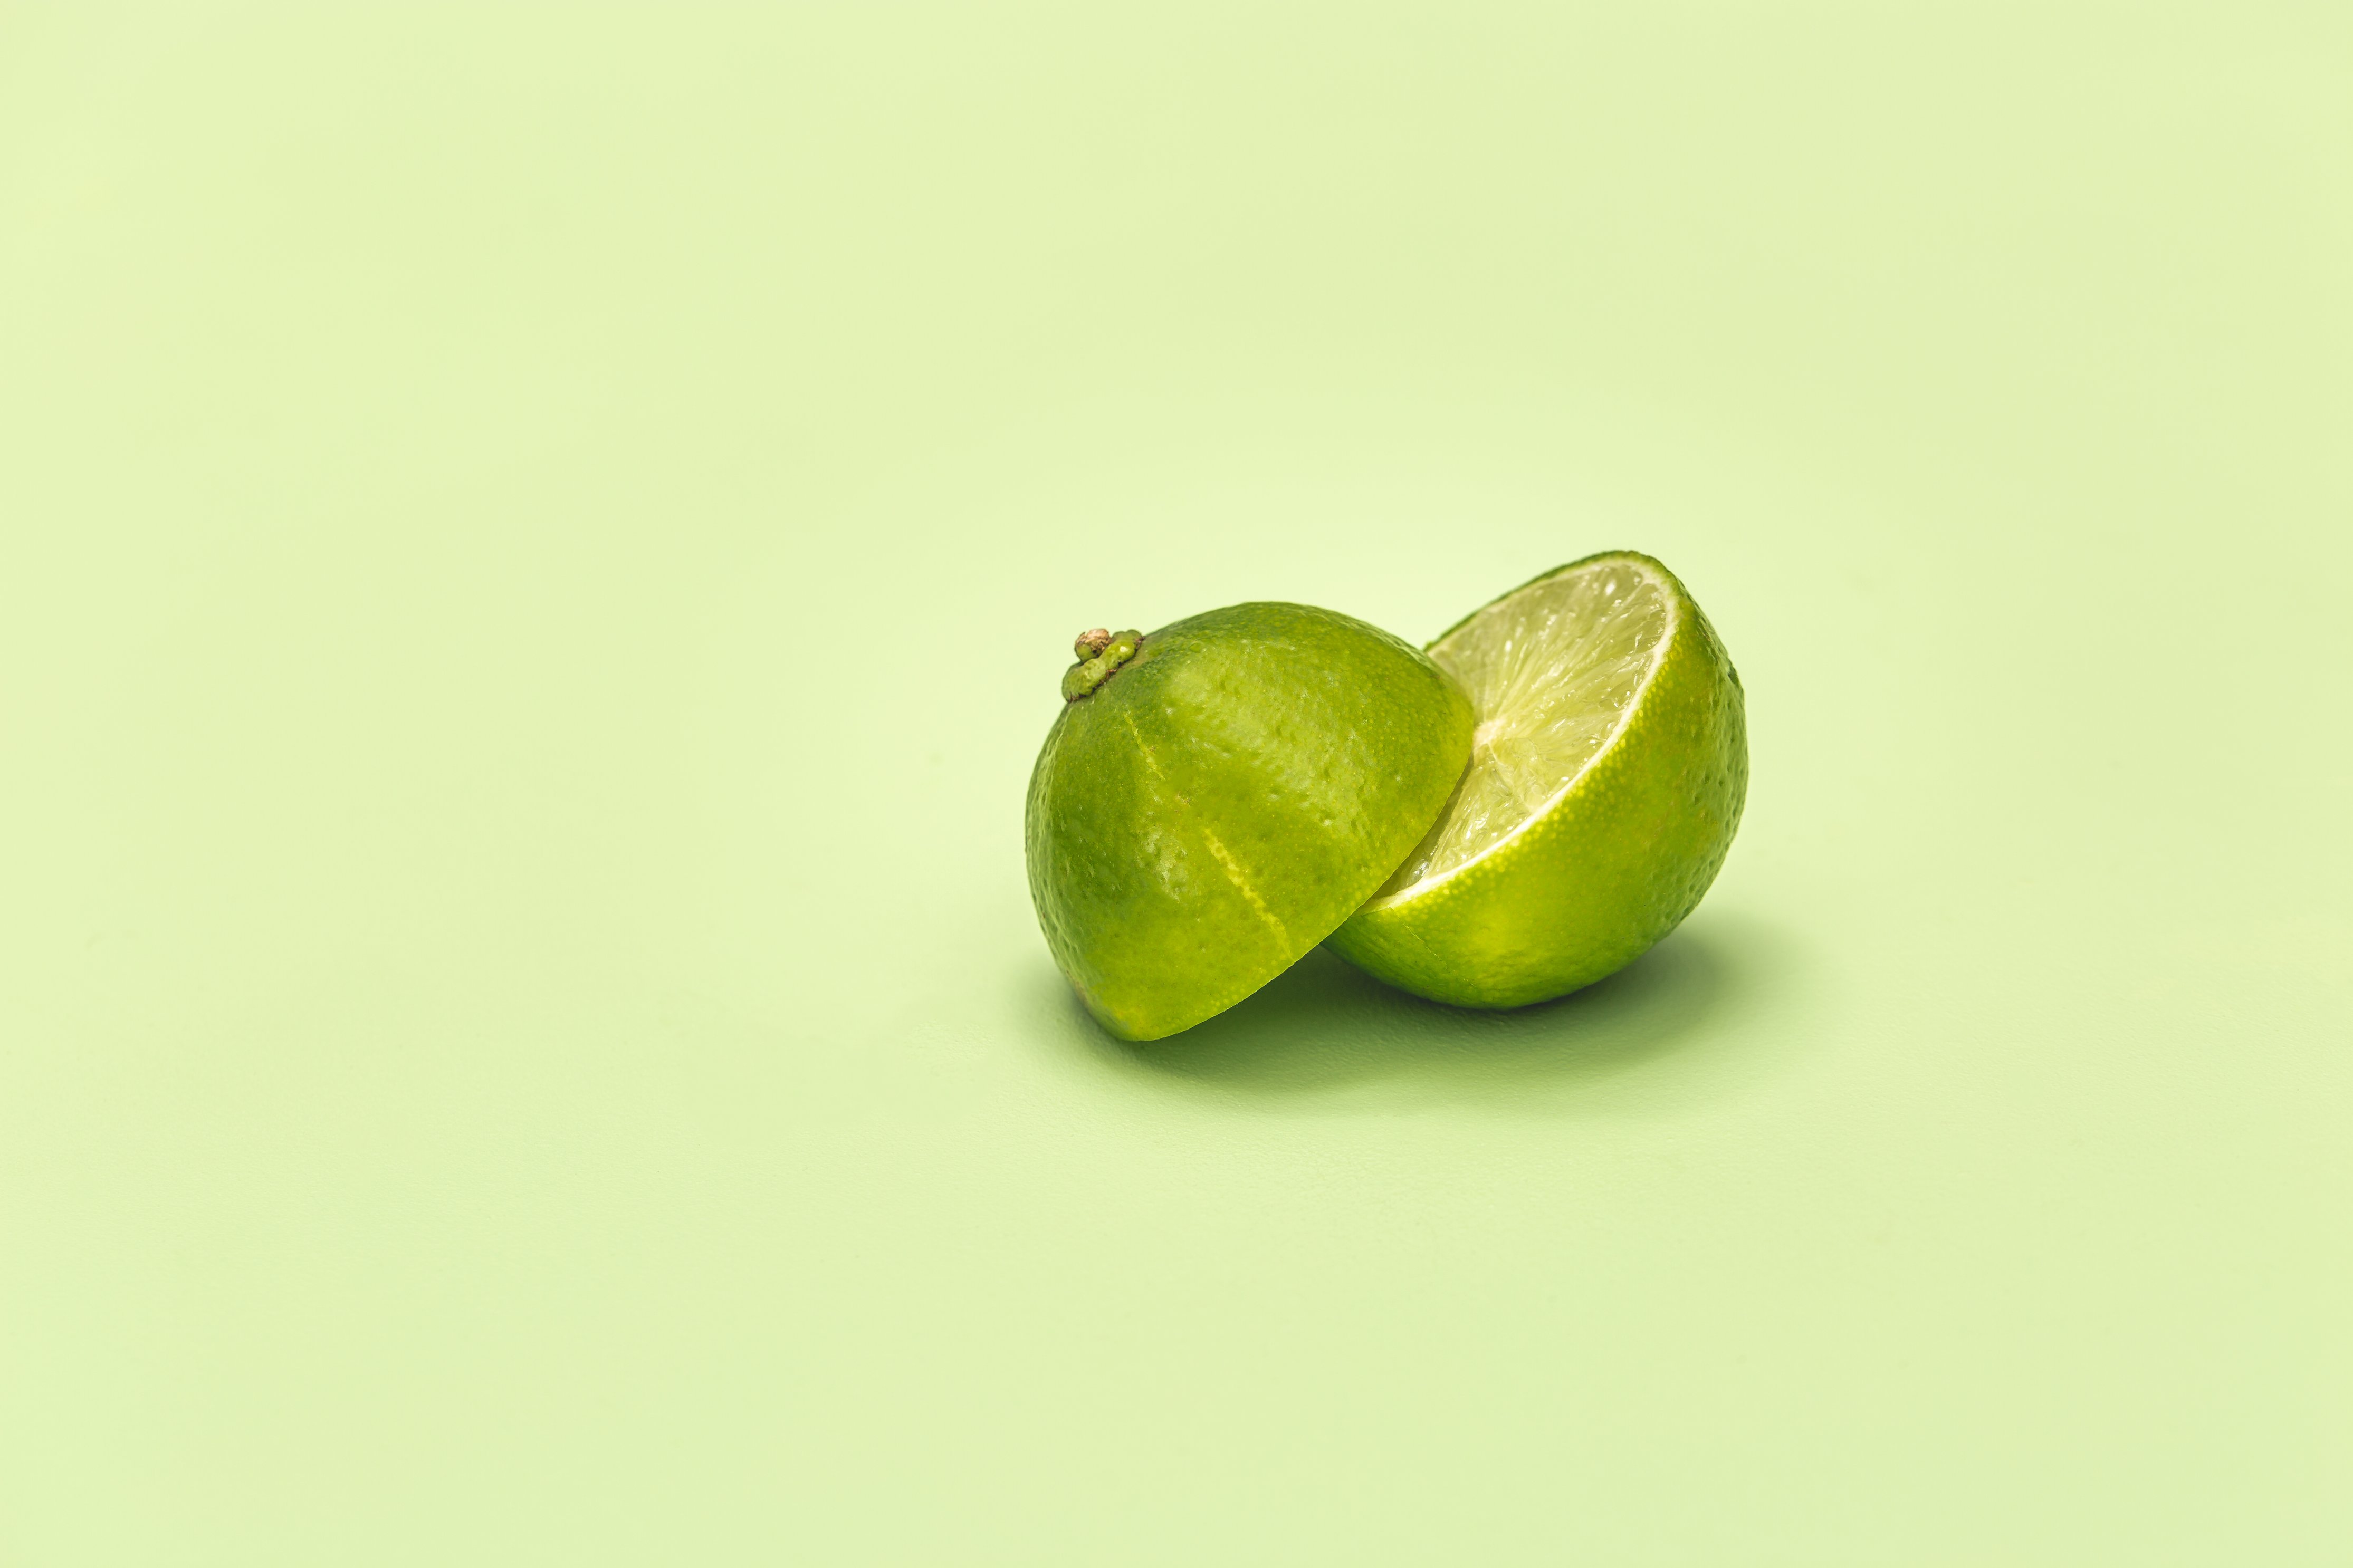 Lime Cut In Half On Green Surface by Matthew Henry